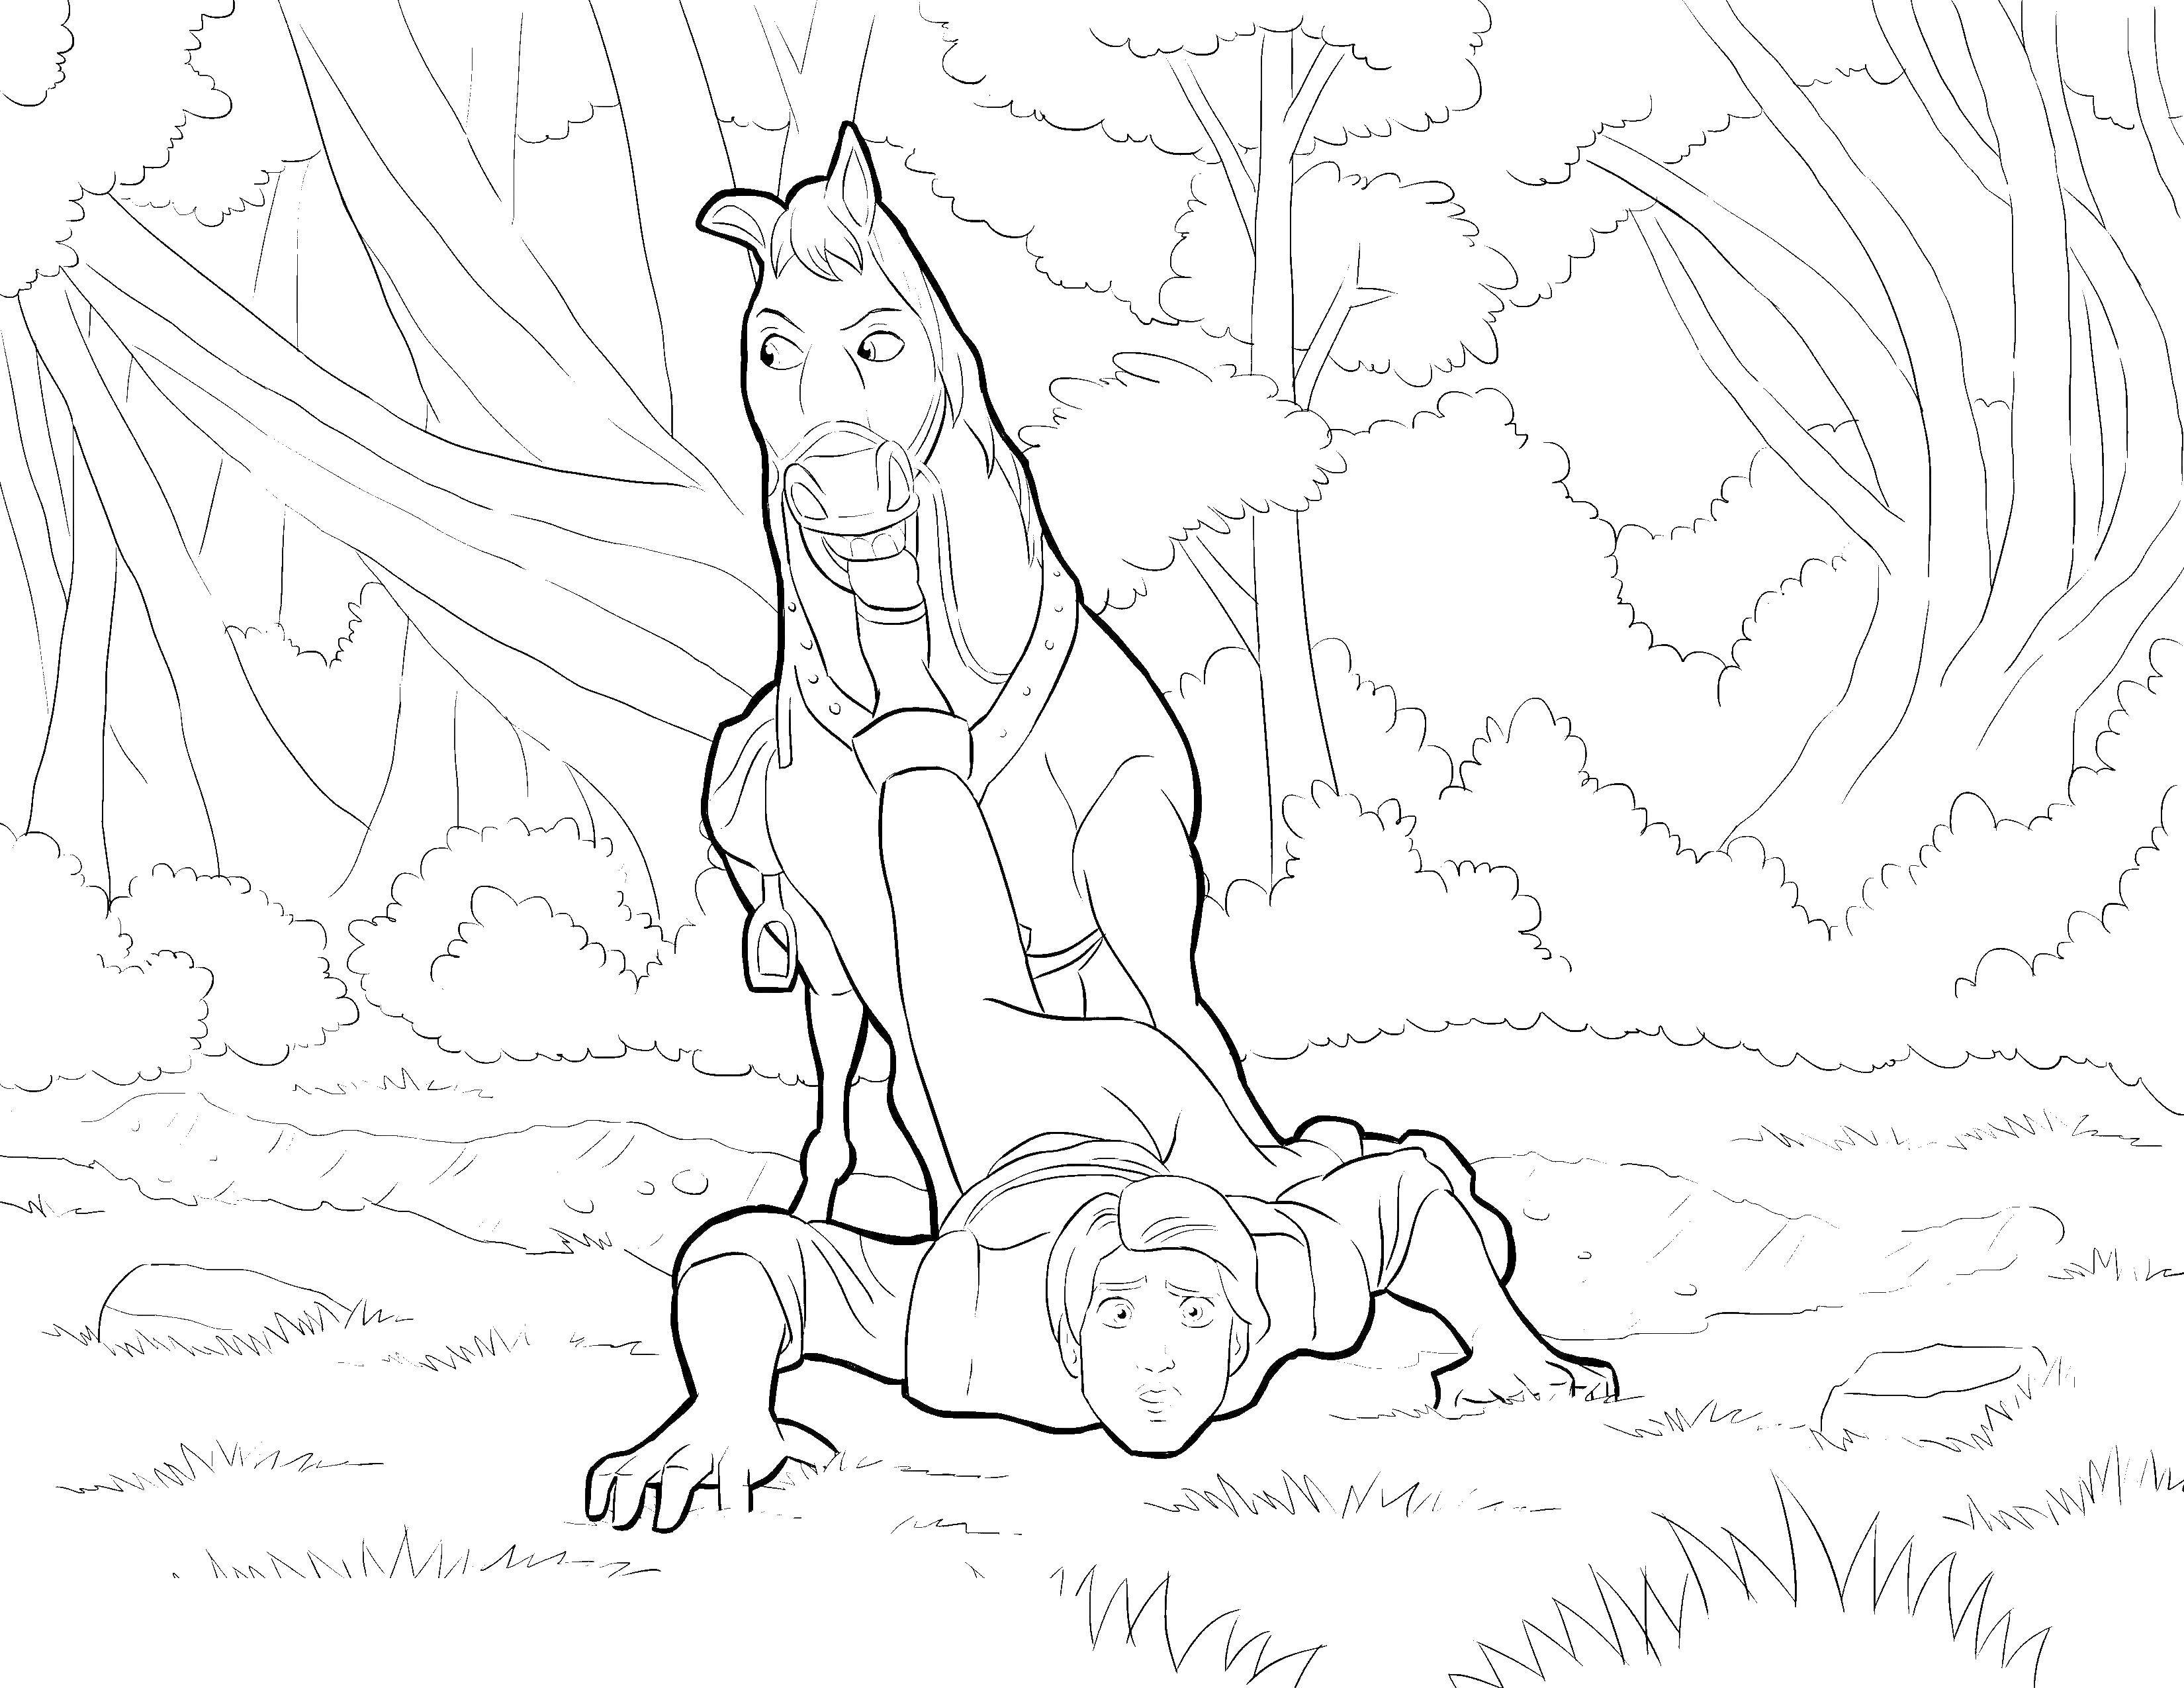 Coloring Flynn rider and Maximus the horse. Category coloring pages Rapunzel tangled. Tags:  Flynn rider, Maximus the horse, tangled.